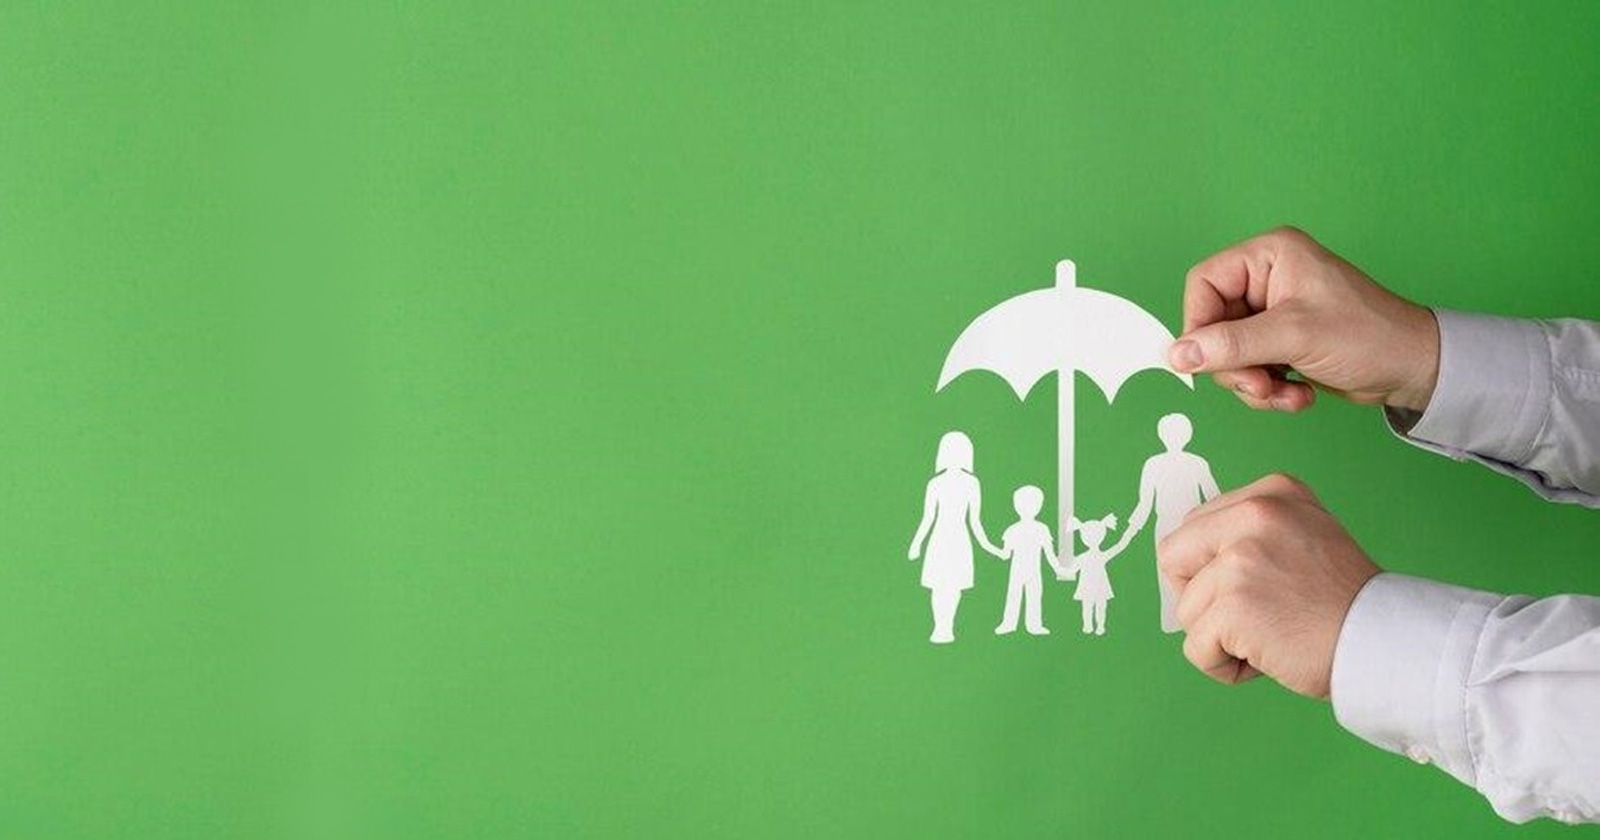 Life insurance - Term plan - Term Insurance for Millennials - Term Plans for Future Protection